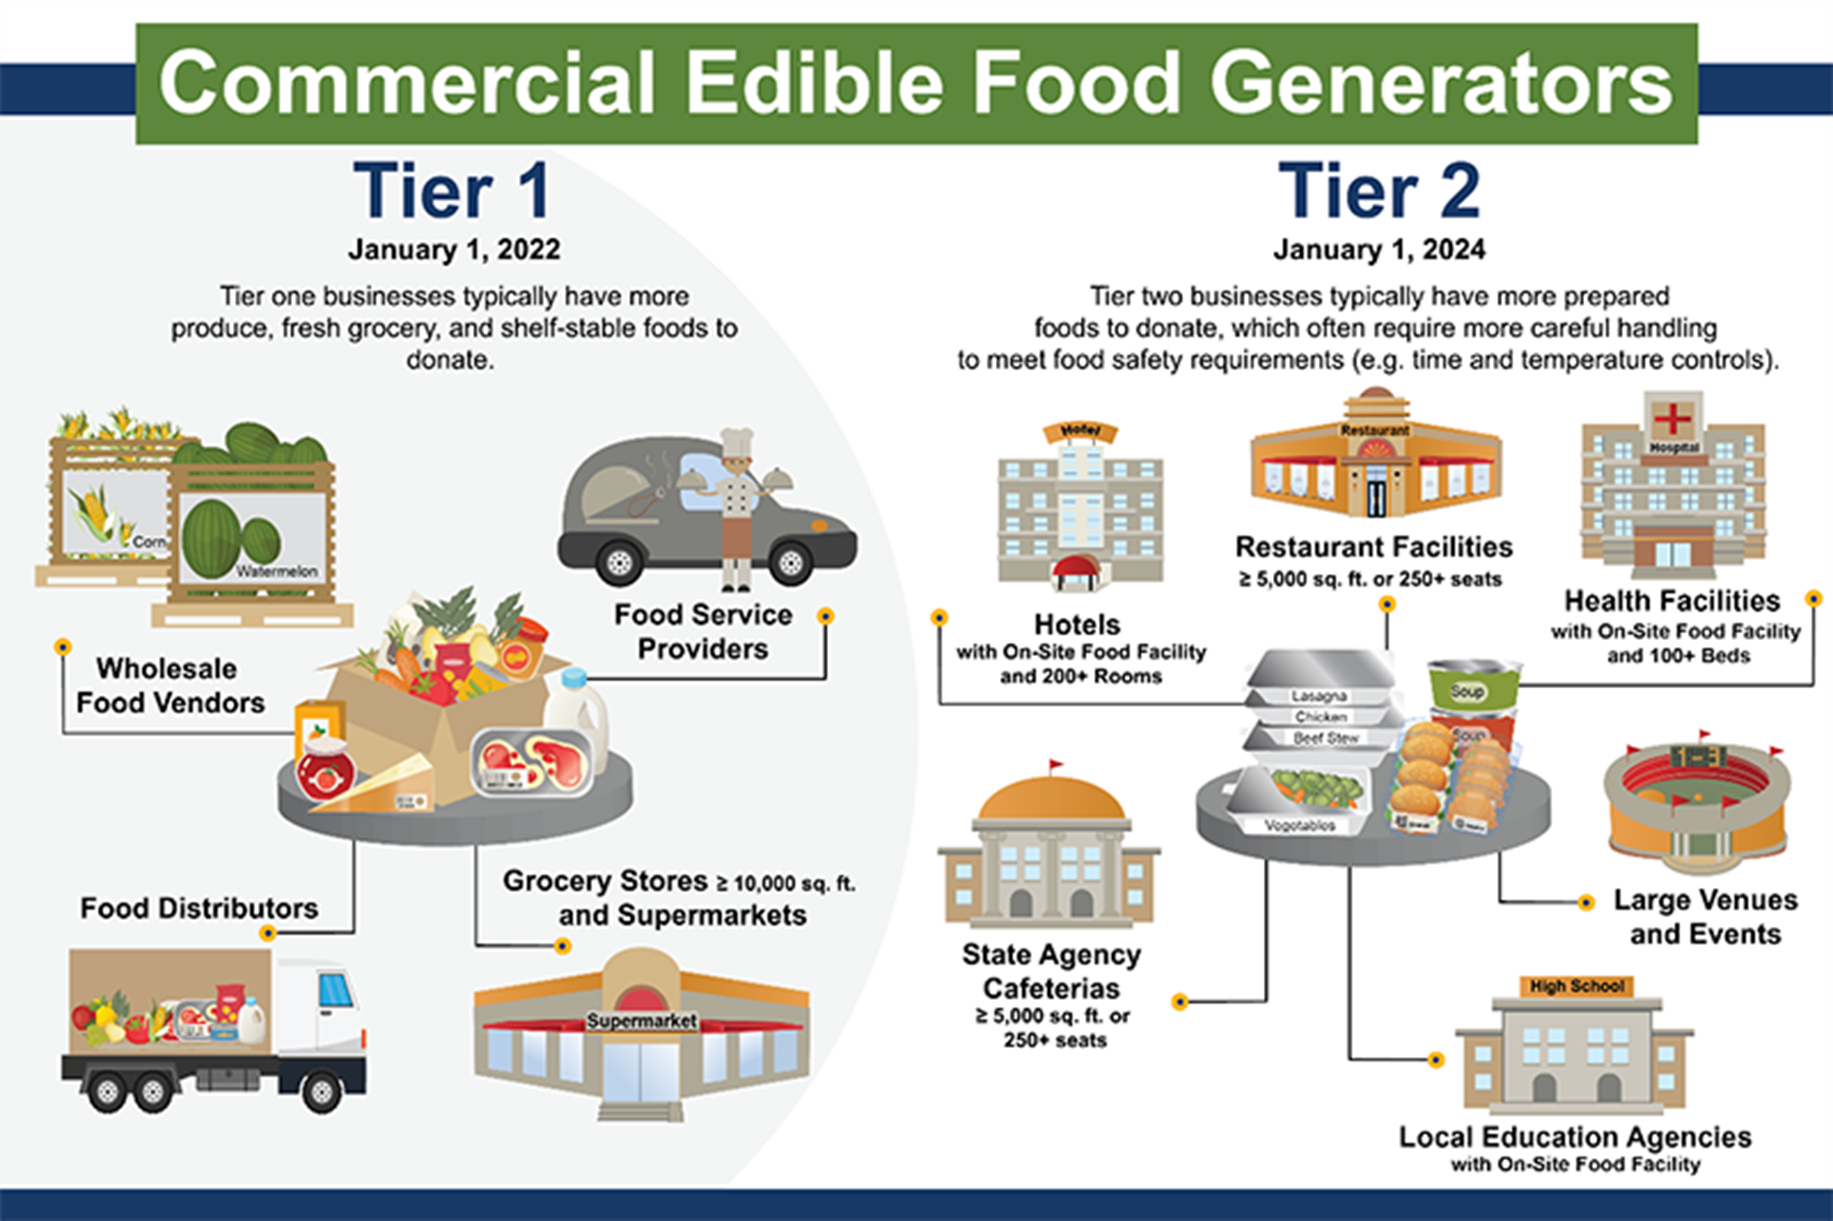 Examples of Tier 1 and Tier 2 commercial edible food generators